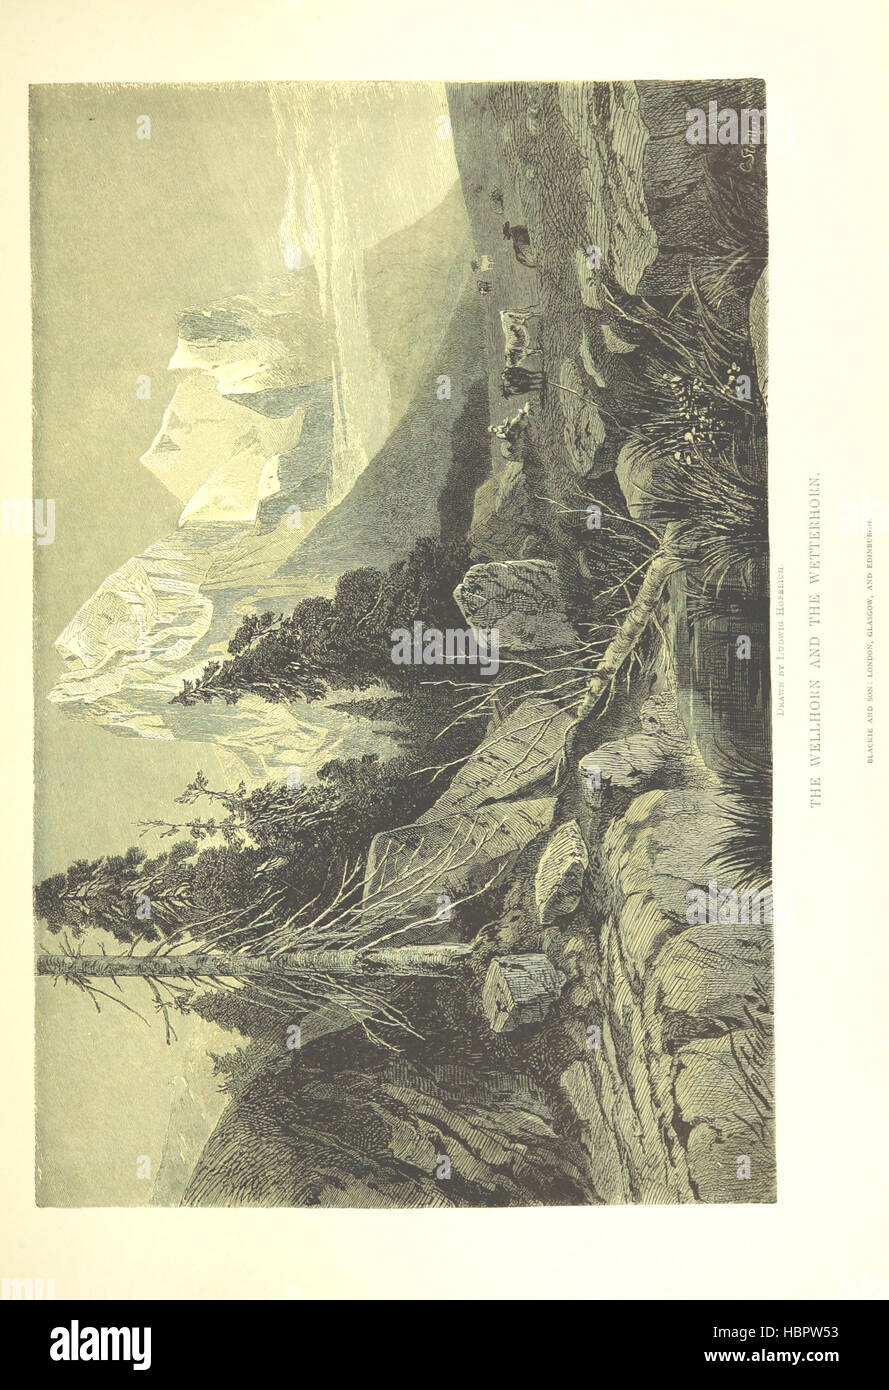 Image taken from page 343 of 'Switzerland: its scenery and people. Pictorially represented by ... Swiss and German artists. With historical and descriptive text, based on the German of Dr Gsell-Fels. [Translated and adapted by G. C. Chisholm.]' Image taken from page 343 of 'Switzerland its scenery and Stock Photo